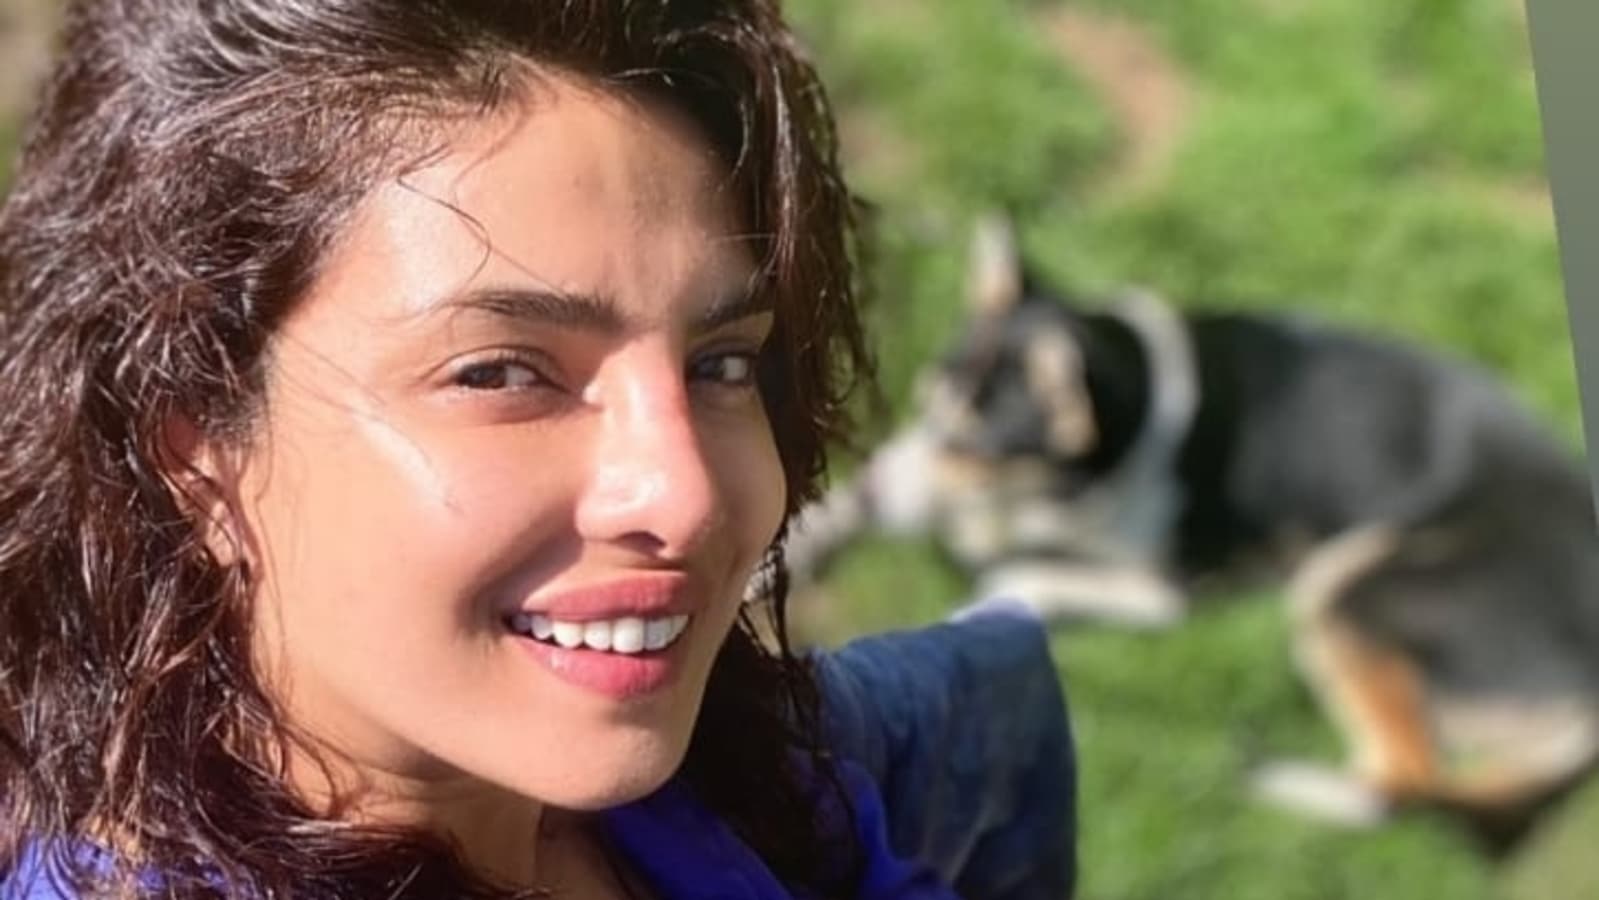 Priyanka Chopra Flaunts A No Makeup Look In Sunny Pic With Her Pup As